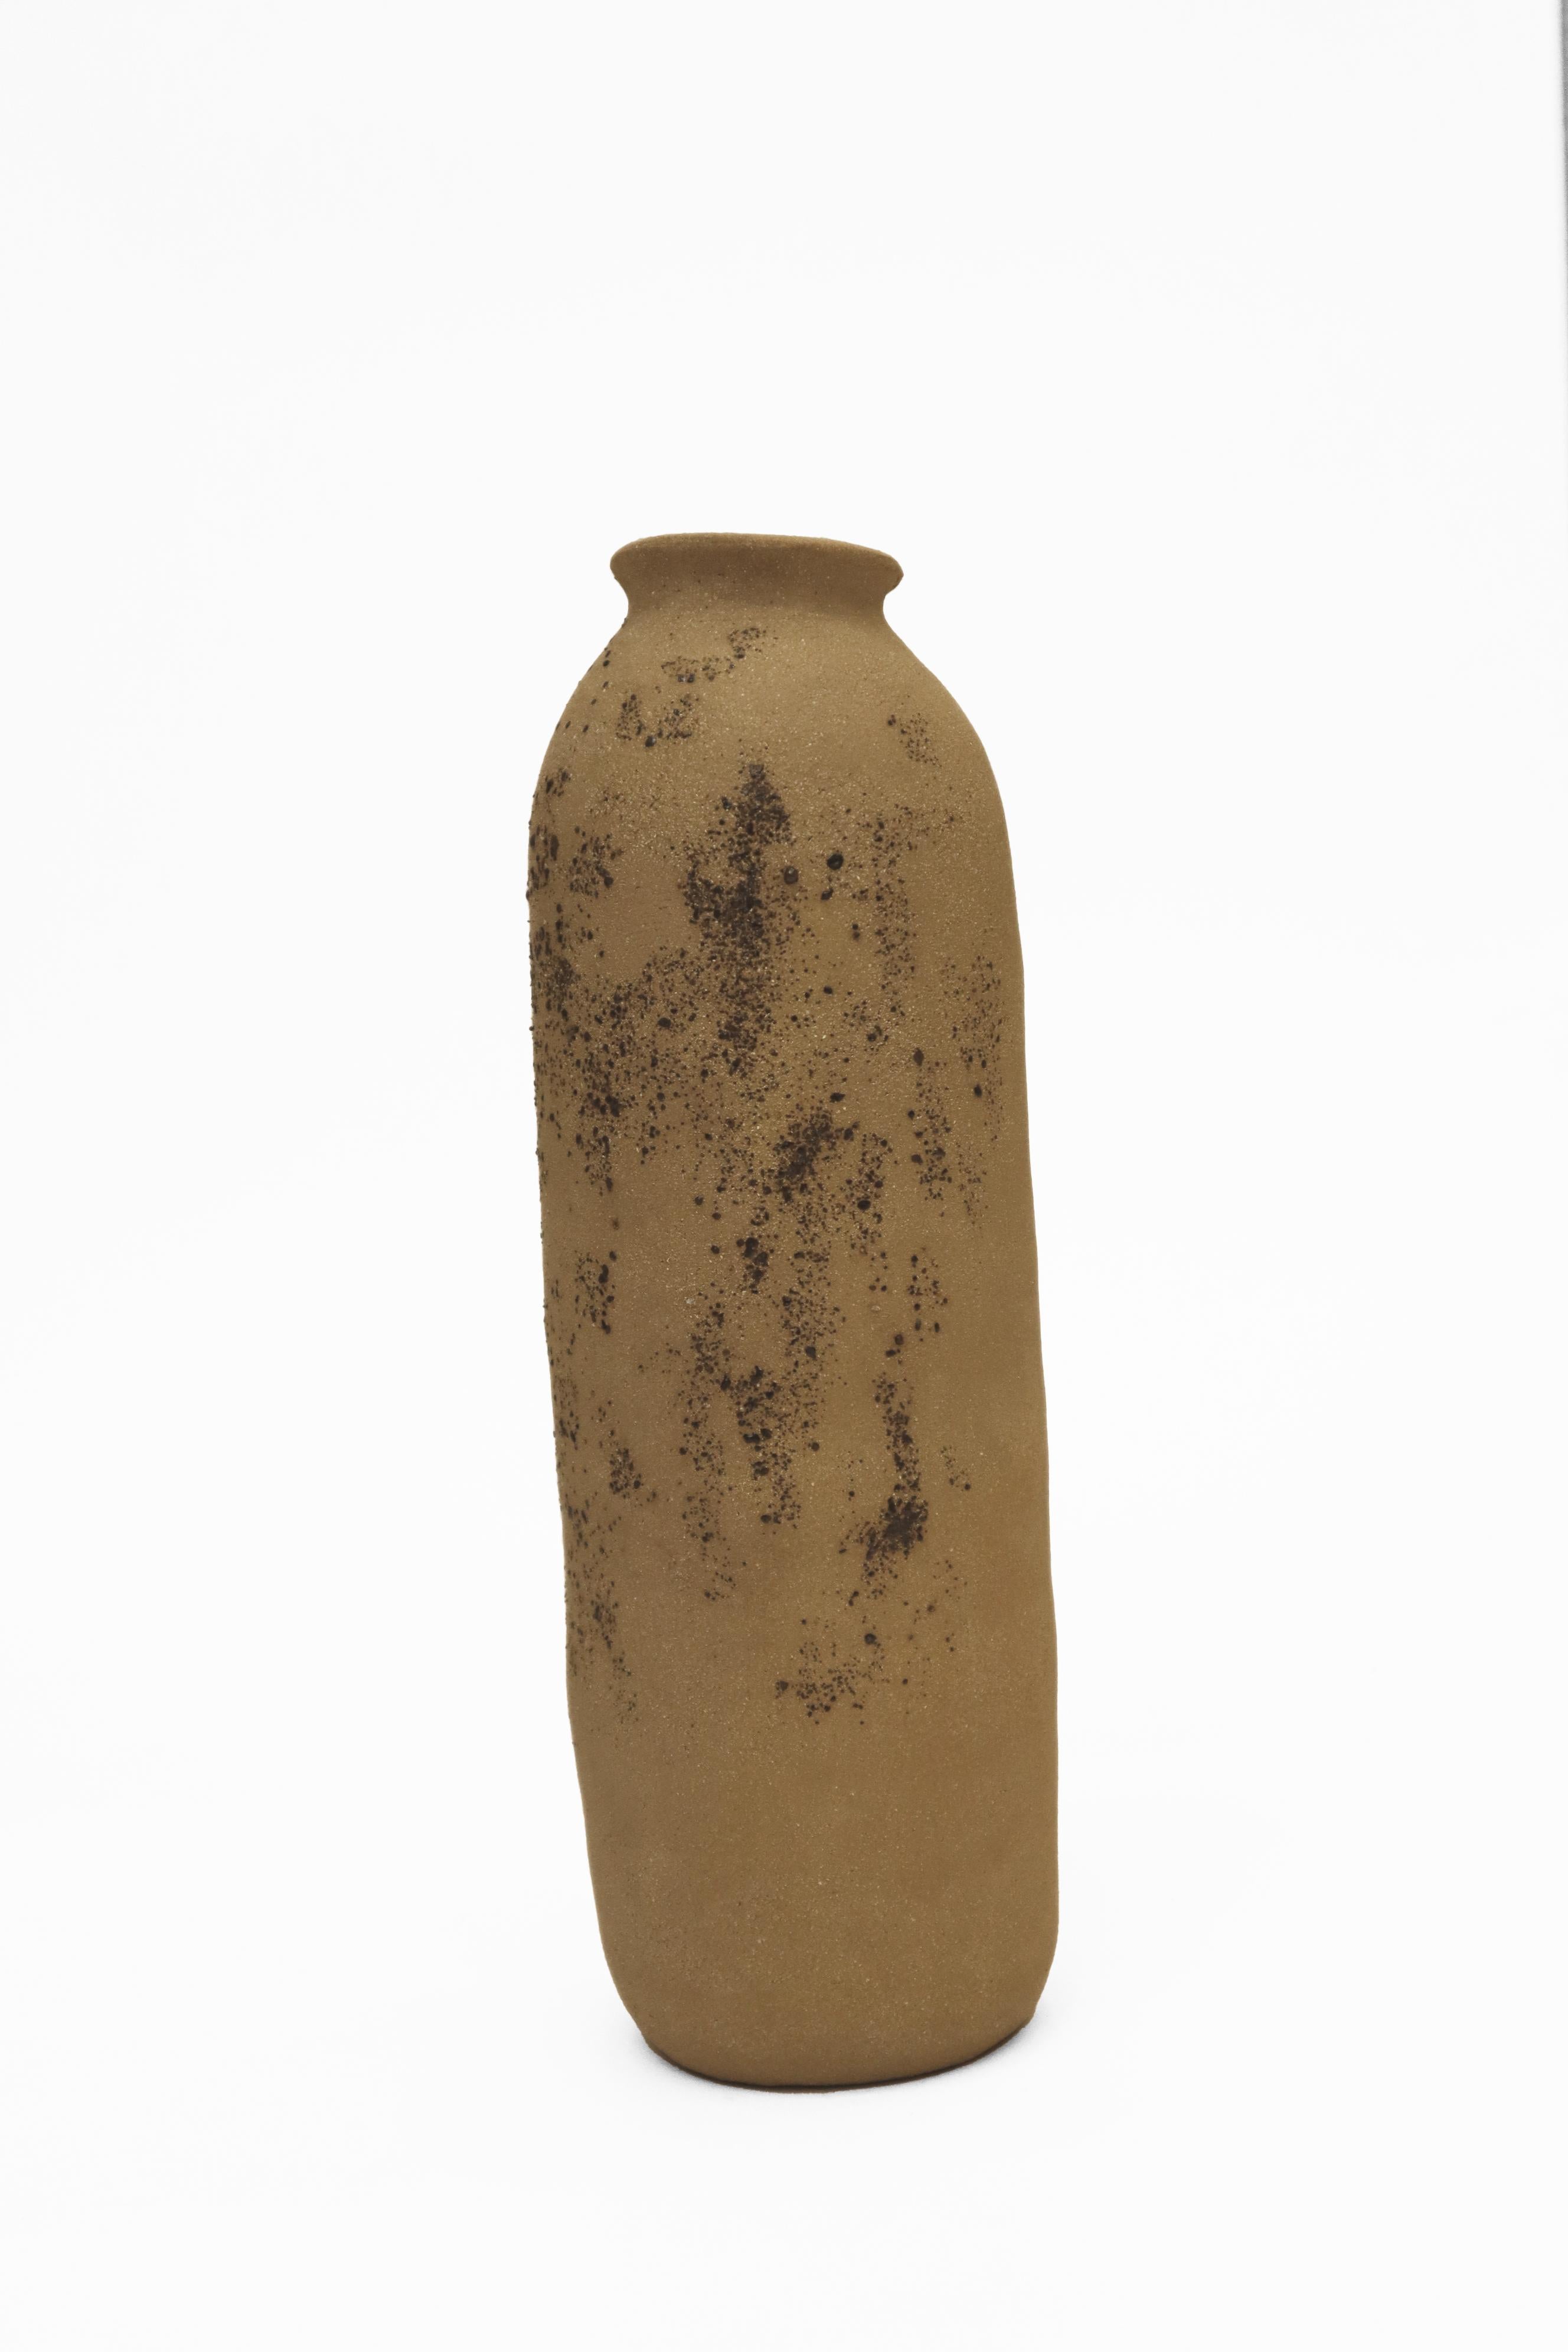 Stomata 6 vase by Anna Karountzou
Dimensions: D 9 x H 31 cm
Materials: Beige stoneware clay, clear glaze inside, decorated outside with volcano rocks collected from Santorini, fired at 1240

Born and based in Athens, Greece, with a background in